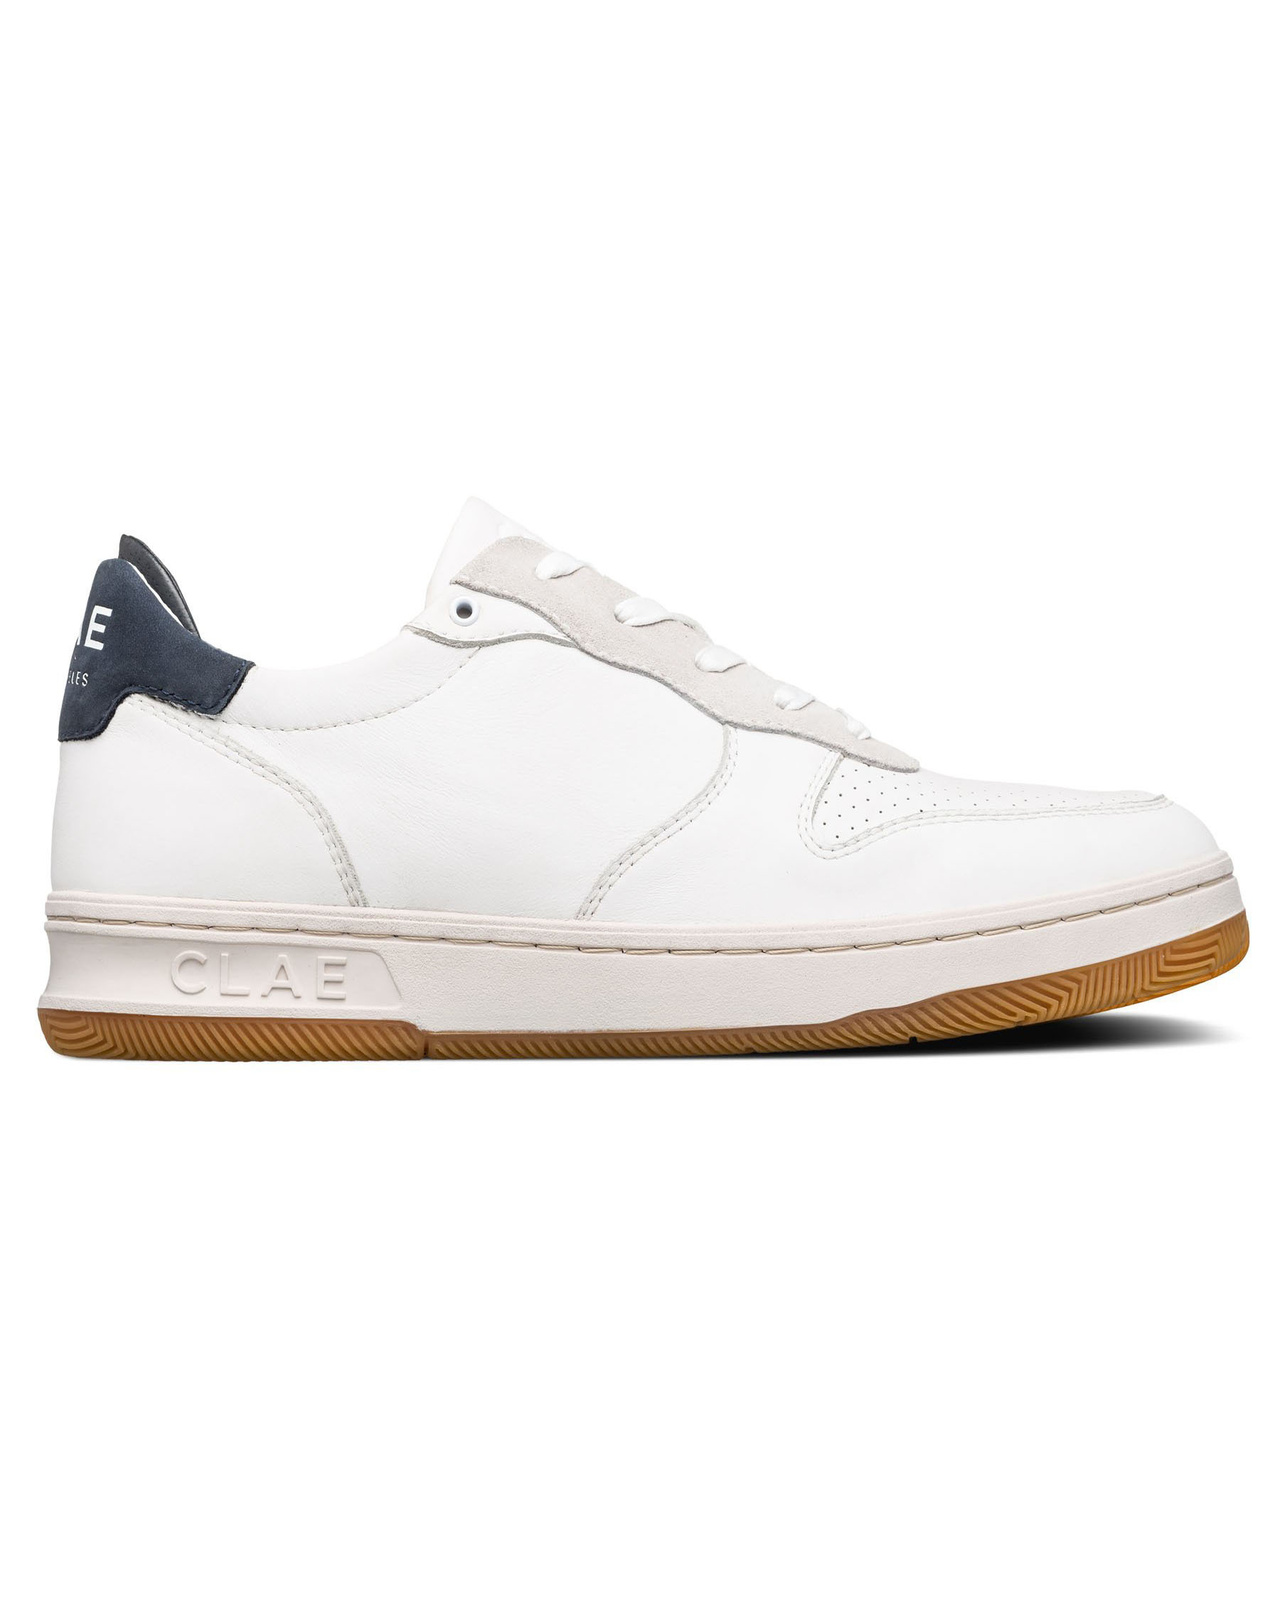 Malone White Milled Leather Navy - 41